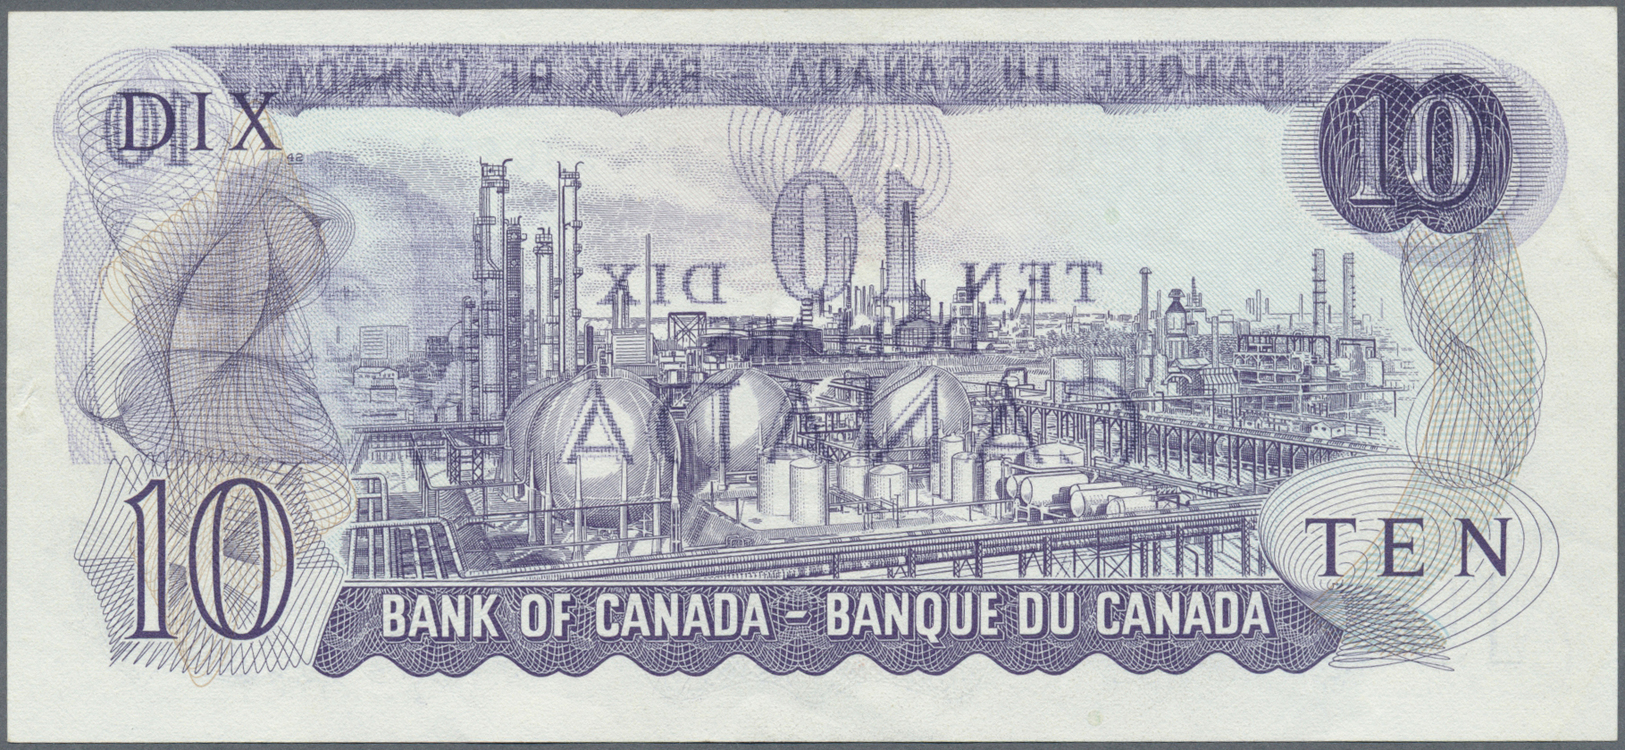 00475 Canada: 10 Dollars 1971 P. 88e With Error Print On Back Side, Partial Print Of The Front Mirrored Print Visible, C - Canada